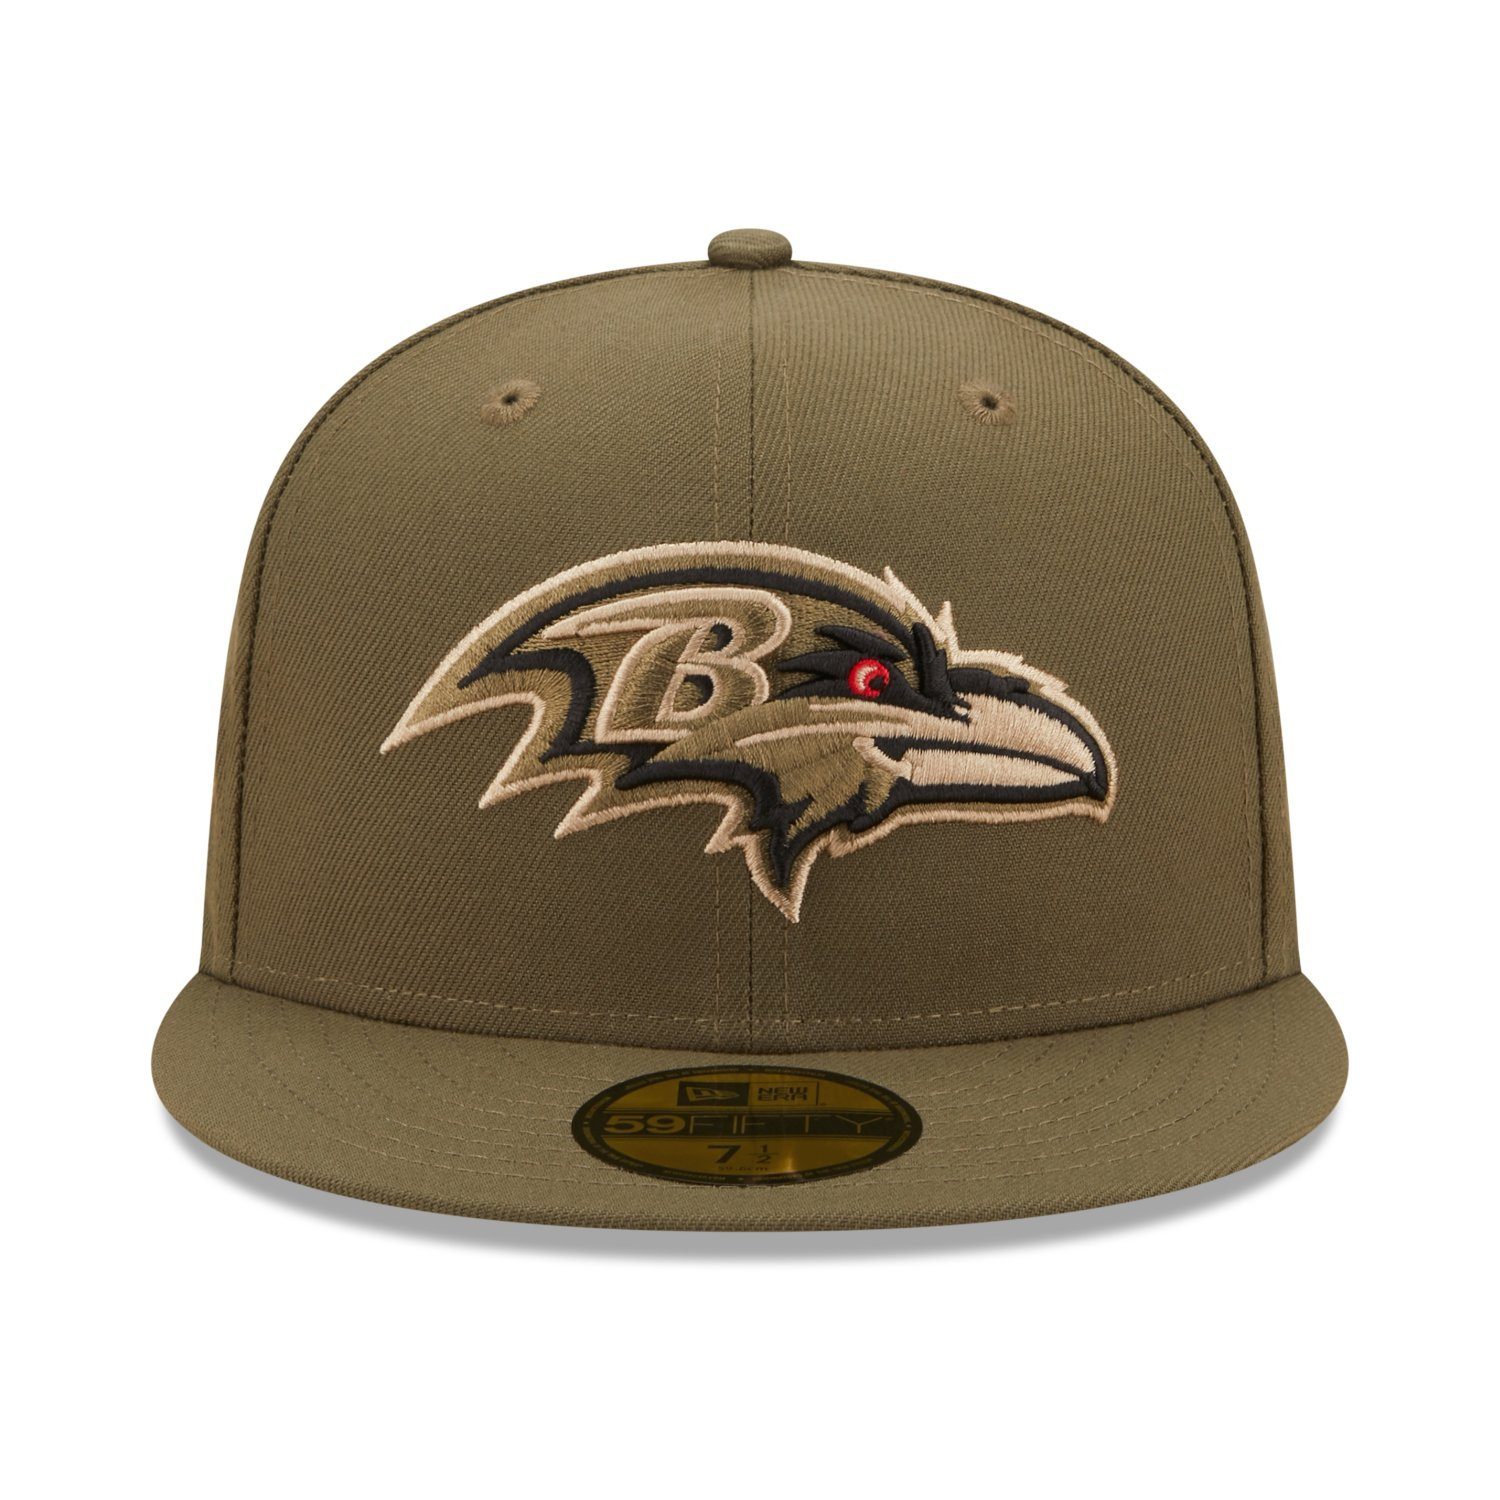 New Era Fitted Cap Throwback NFL ProBowl Superbowl Ravens 59Fifty Baltimore